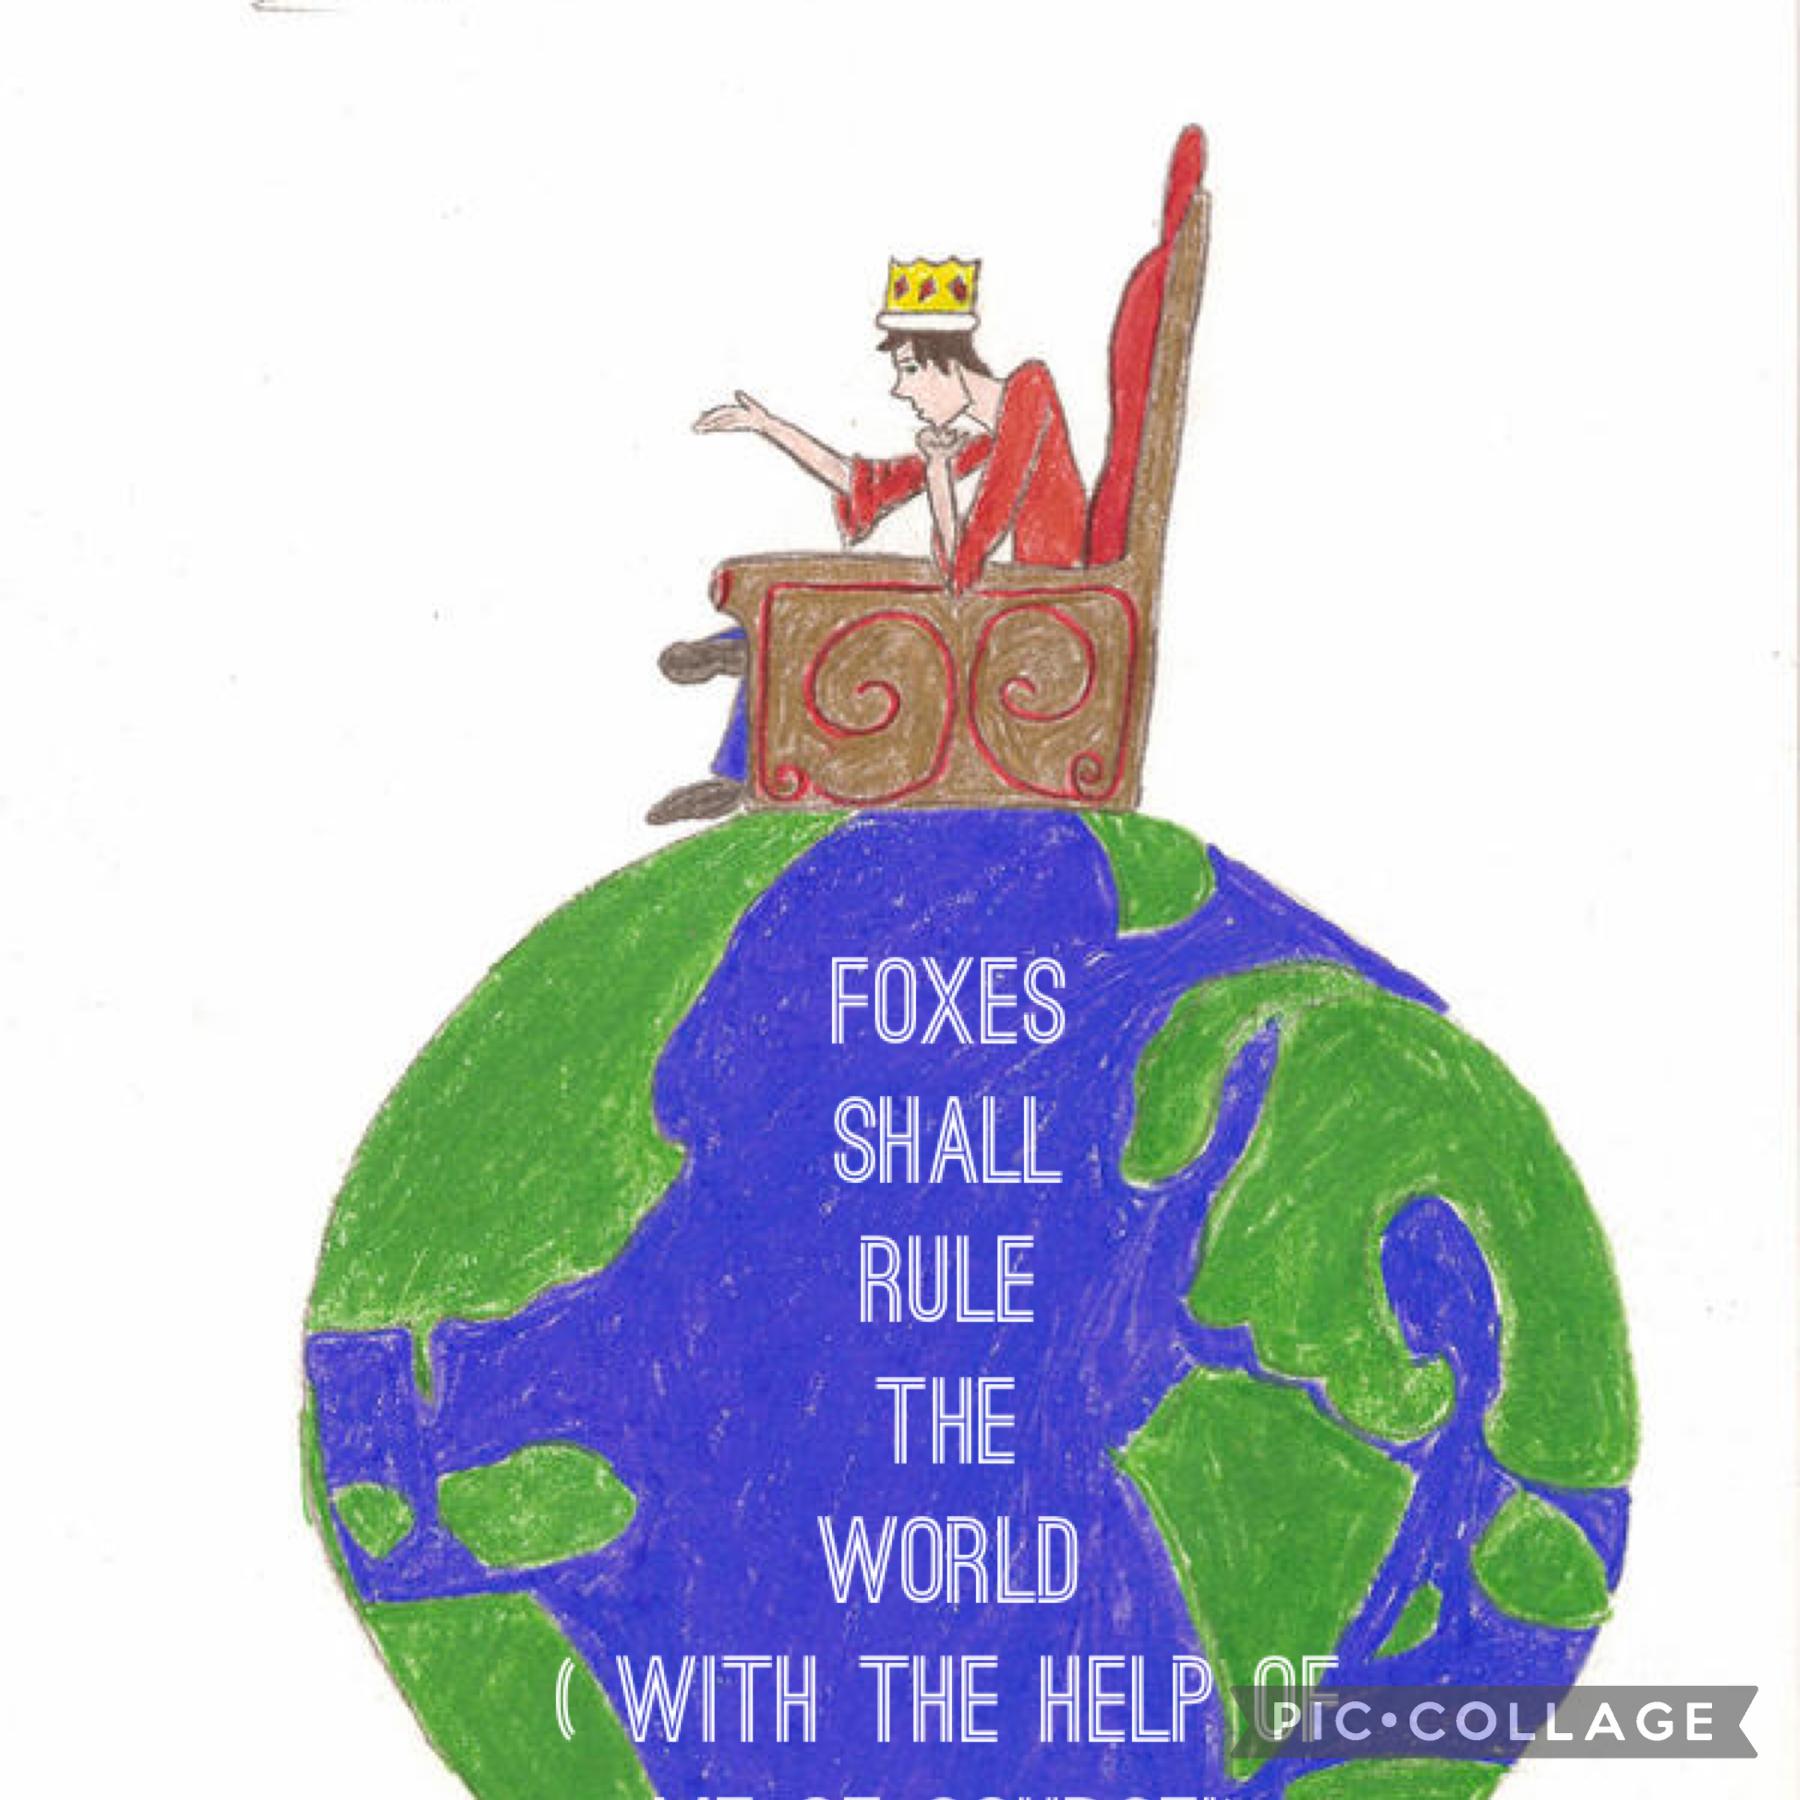 Foxes
Shall
Rule
The
World
( With the help of me of course!)